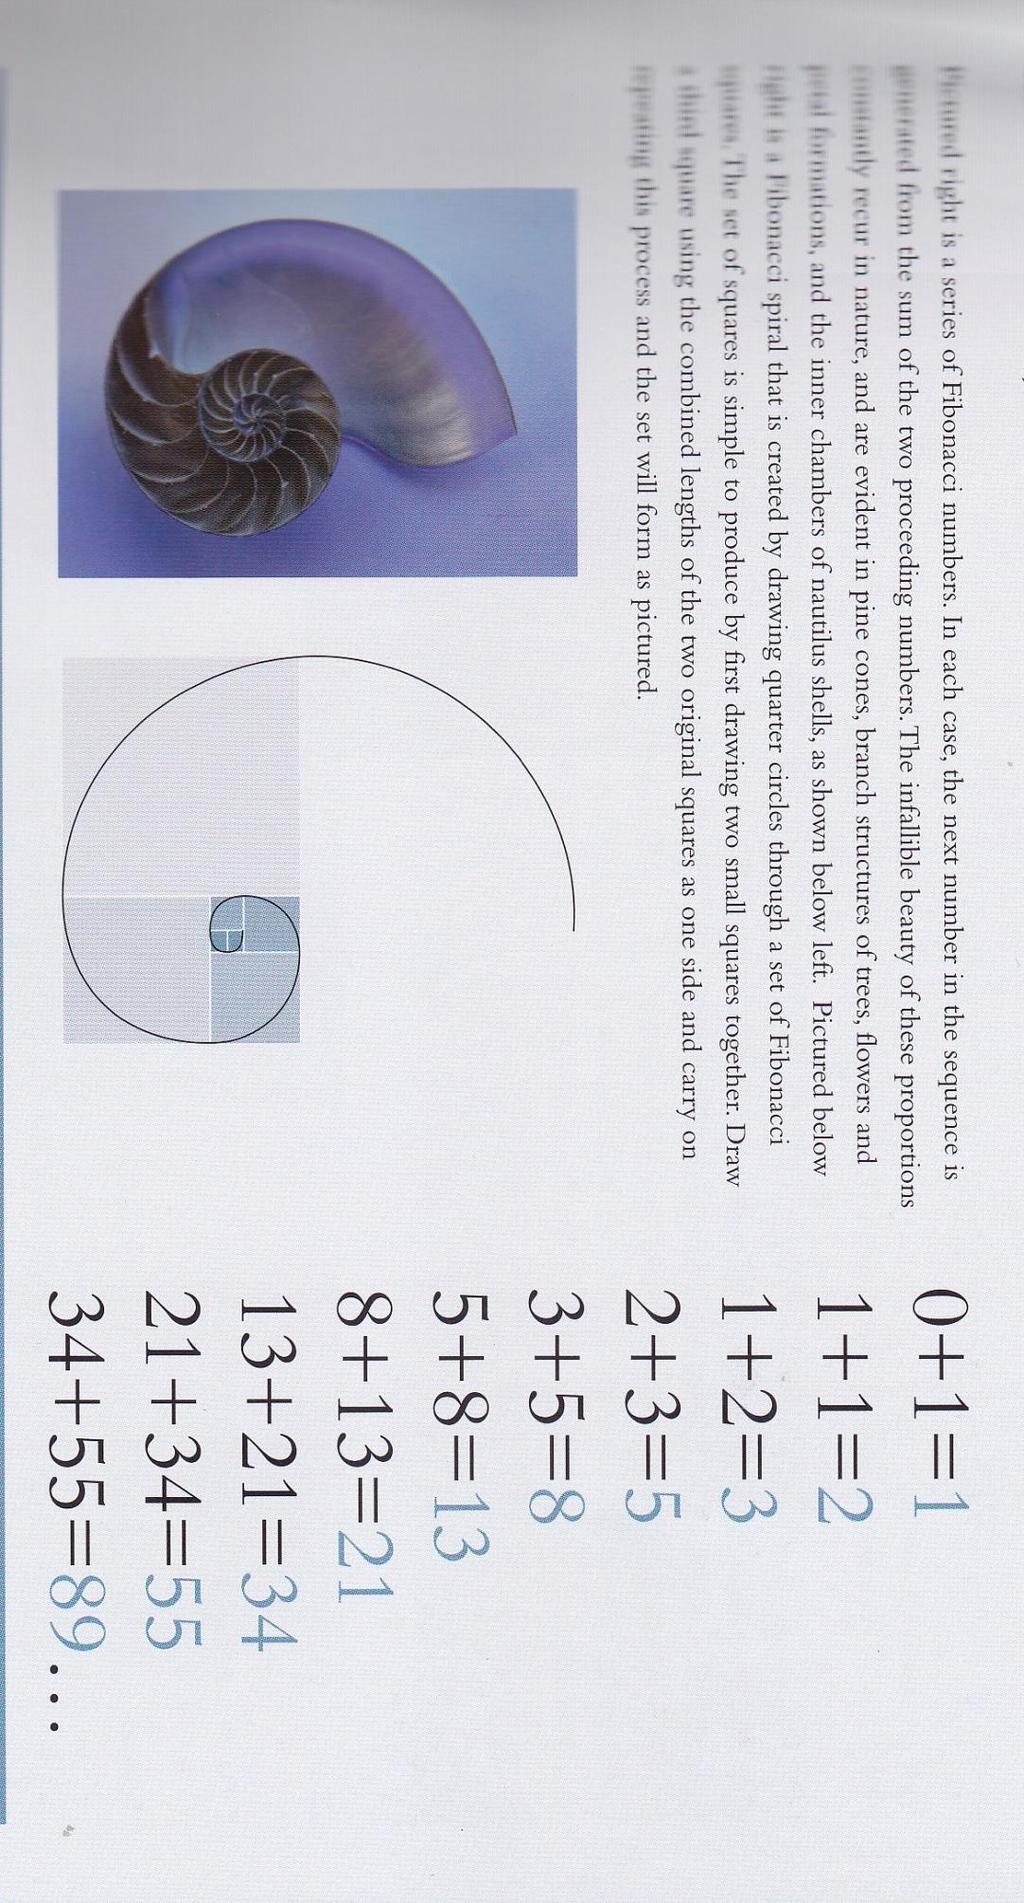 TYPOGRAPHY BASIC DESIGN Golden Section The Fibonacci sequence Is a